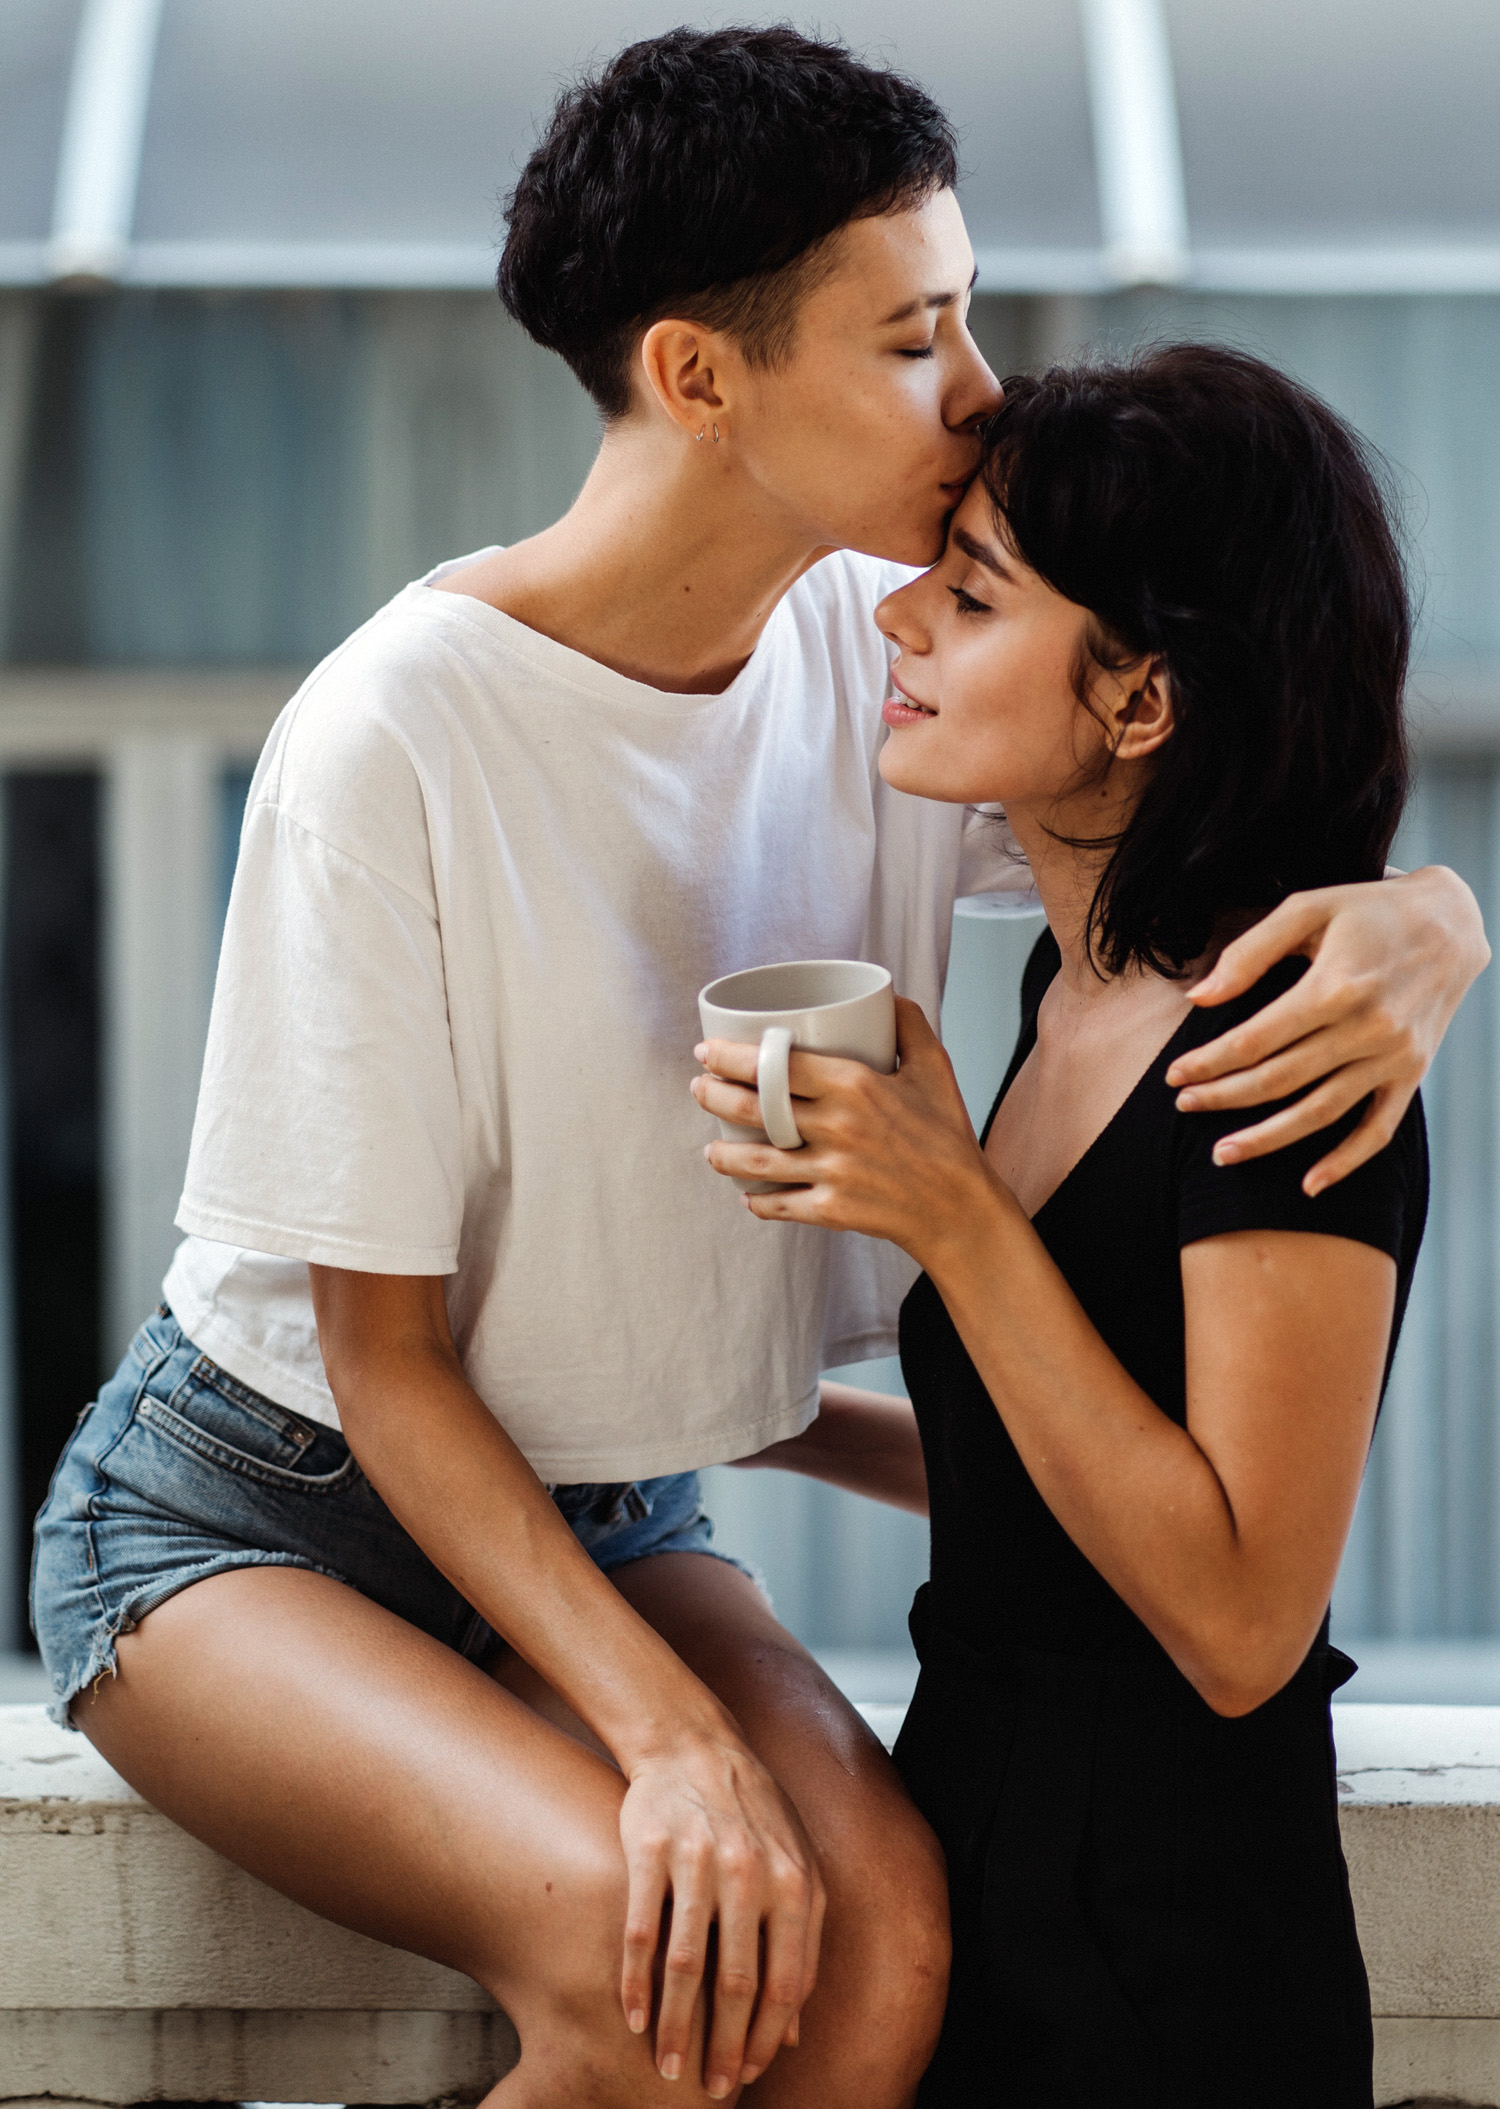 Greysexual woman kissing another's forehead